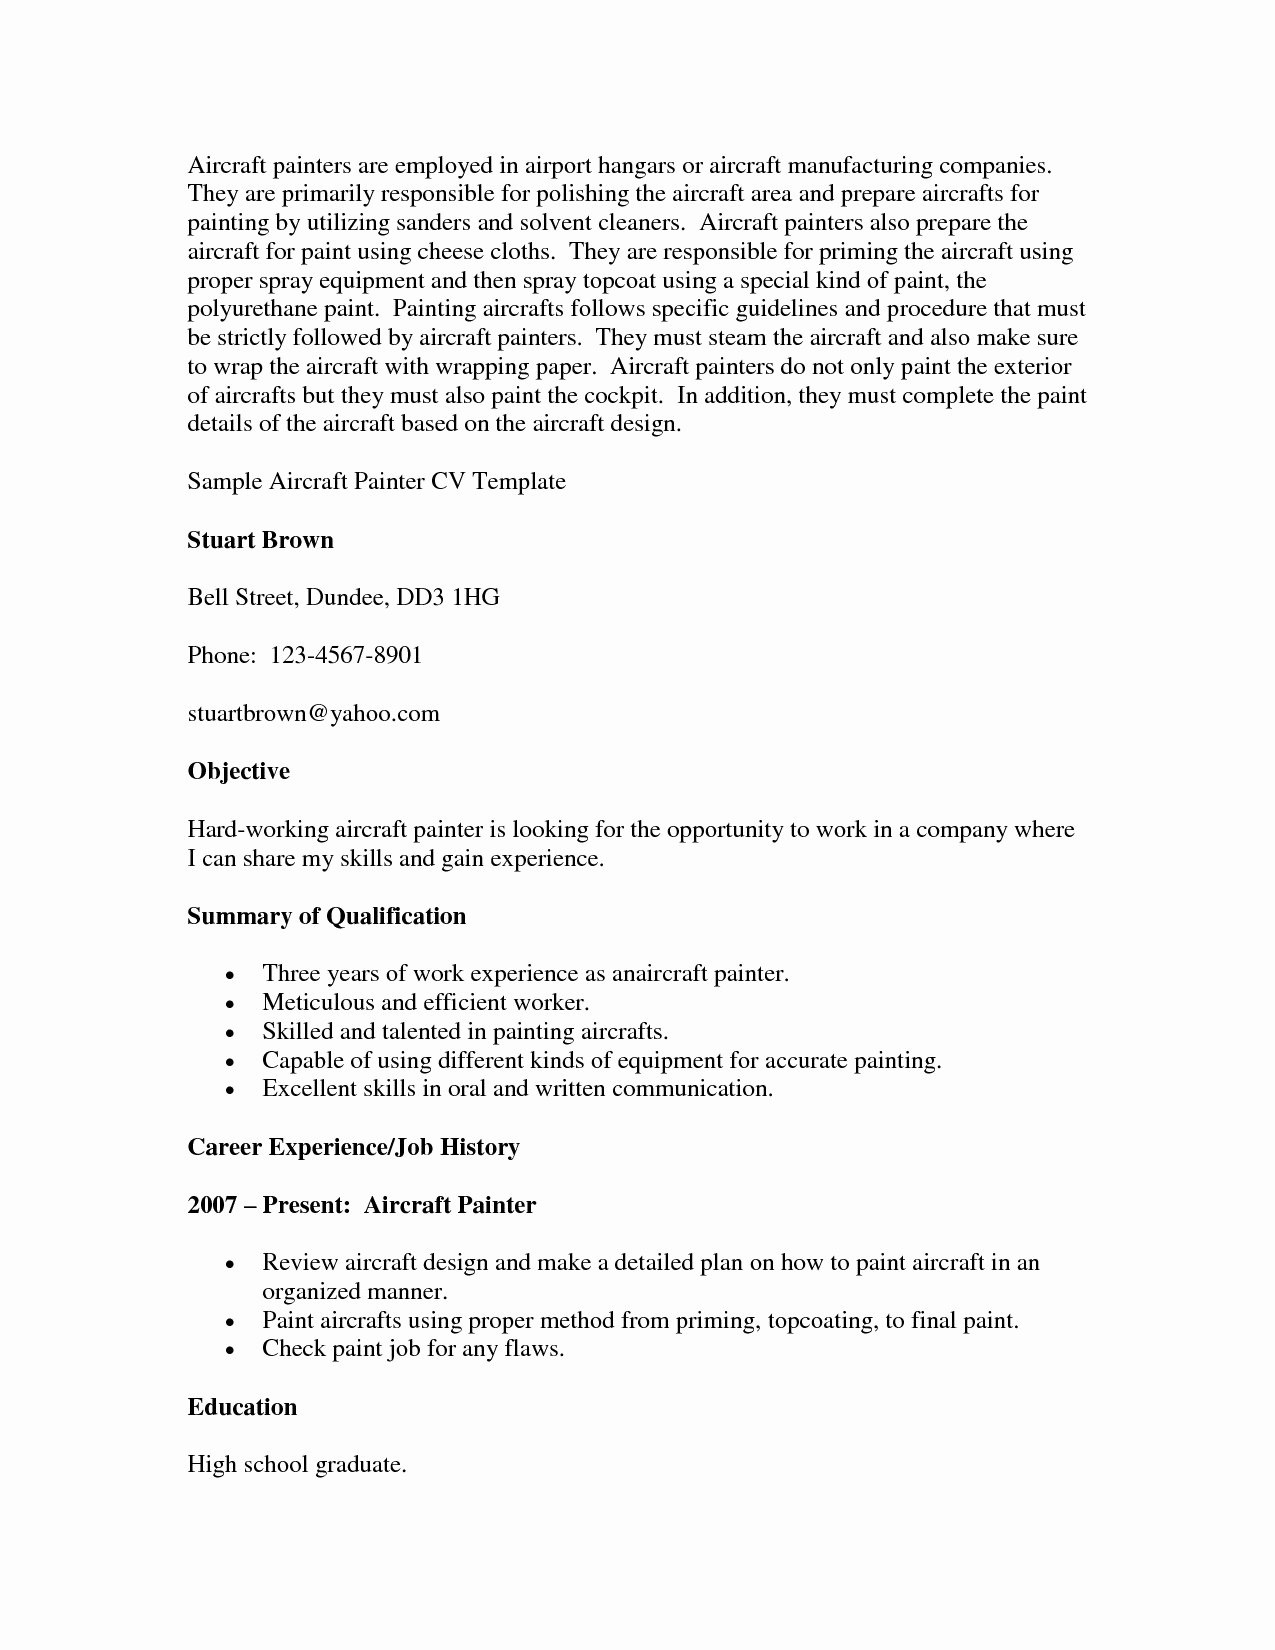 Resume Profile Examples  Resume Objectives For College Students Resume Profile Examples For